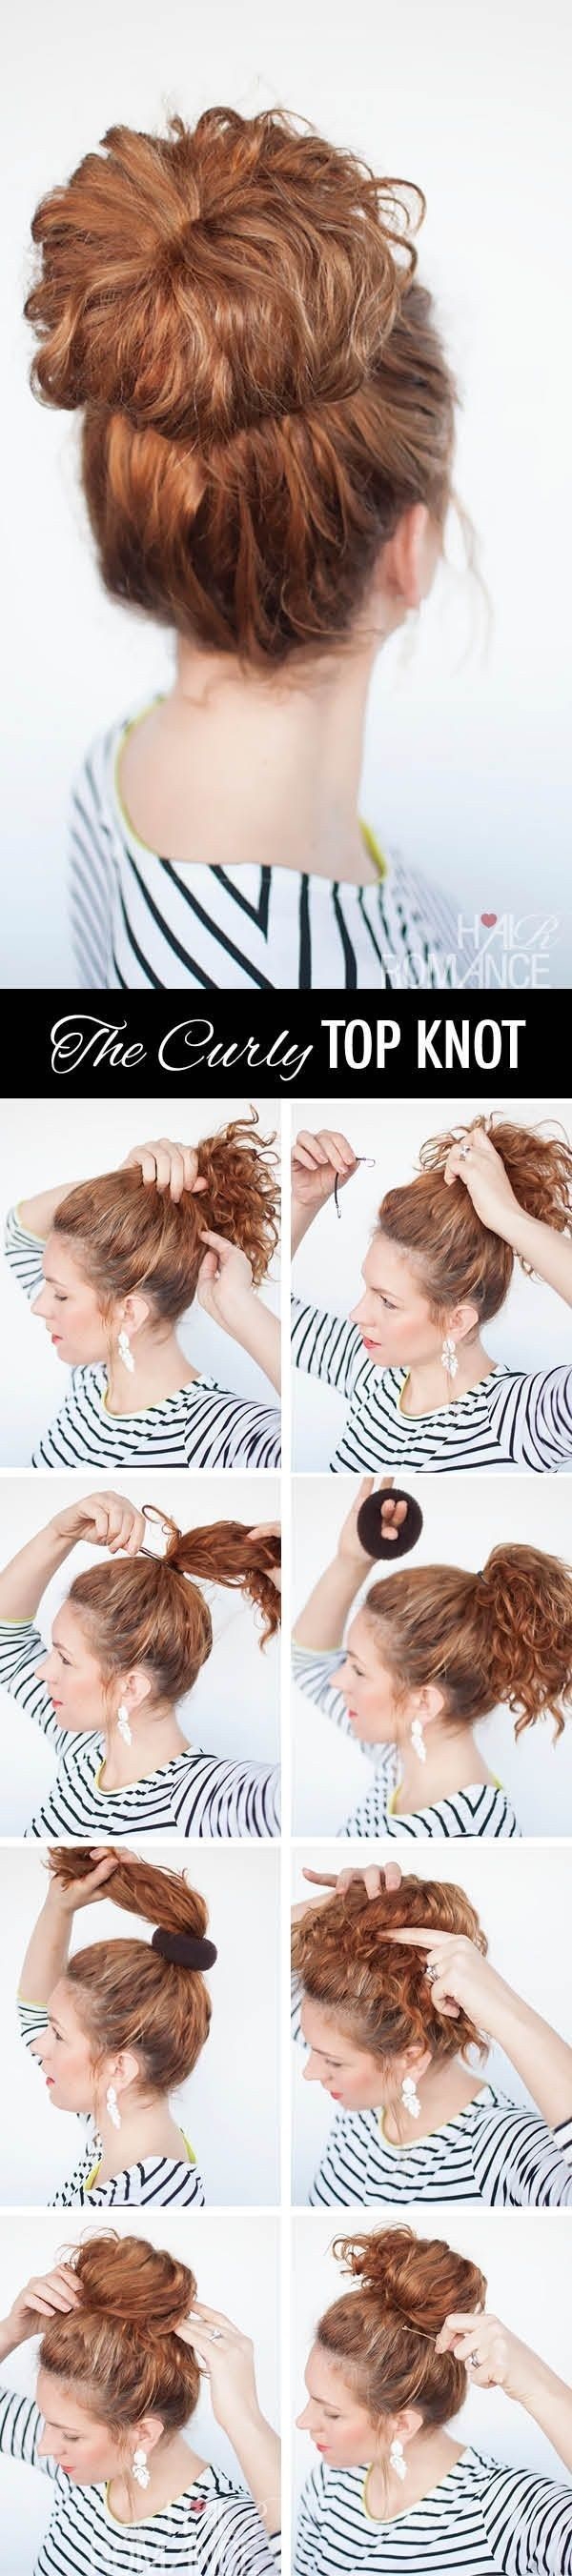 Simple Five Minute Hairstyles (17)